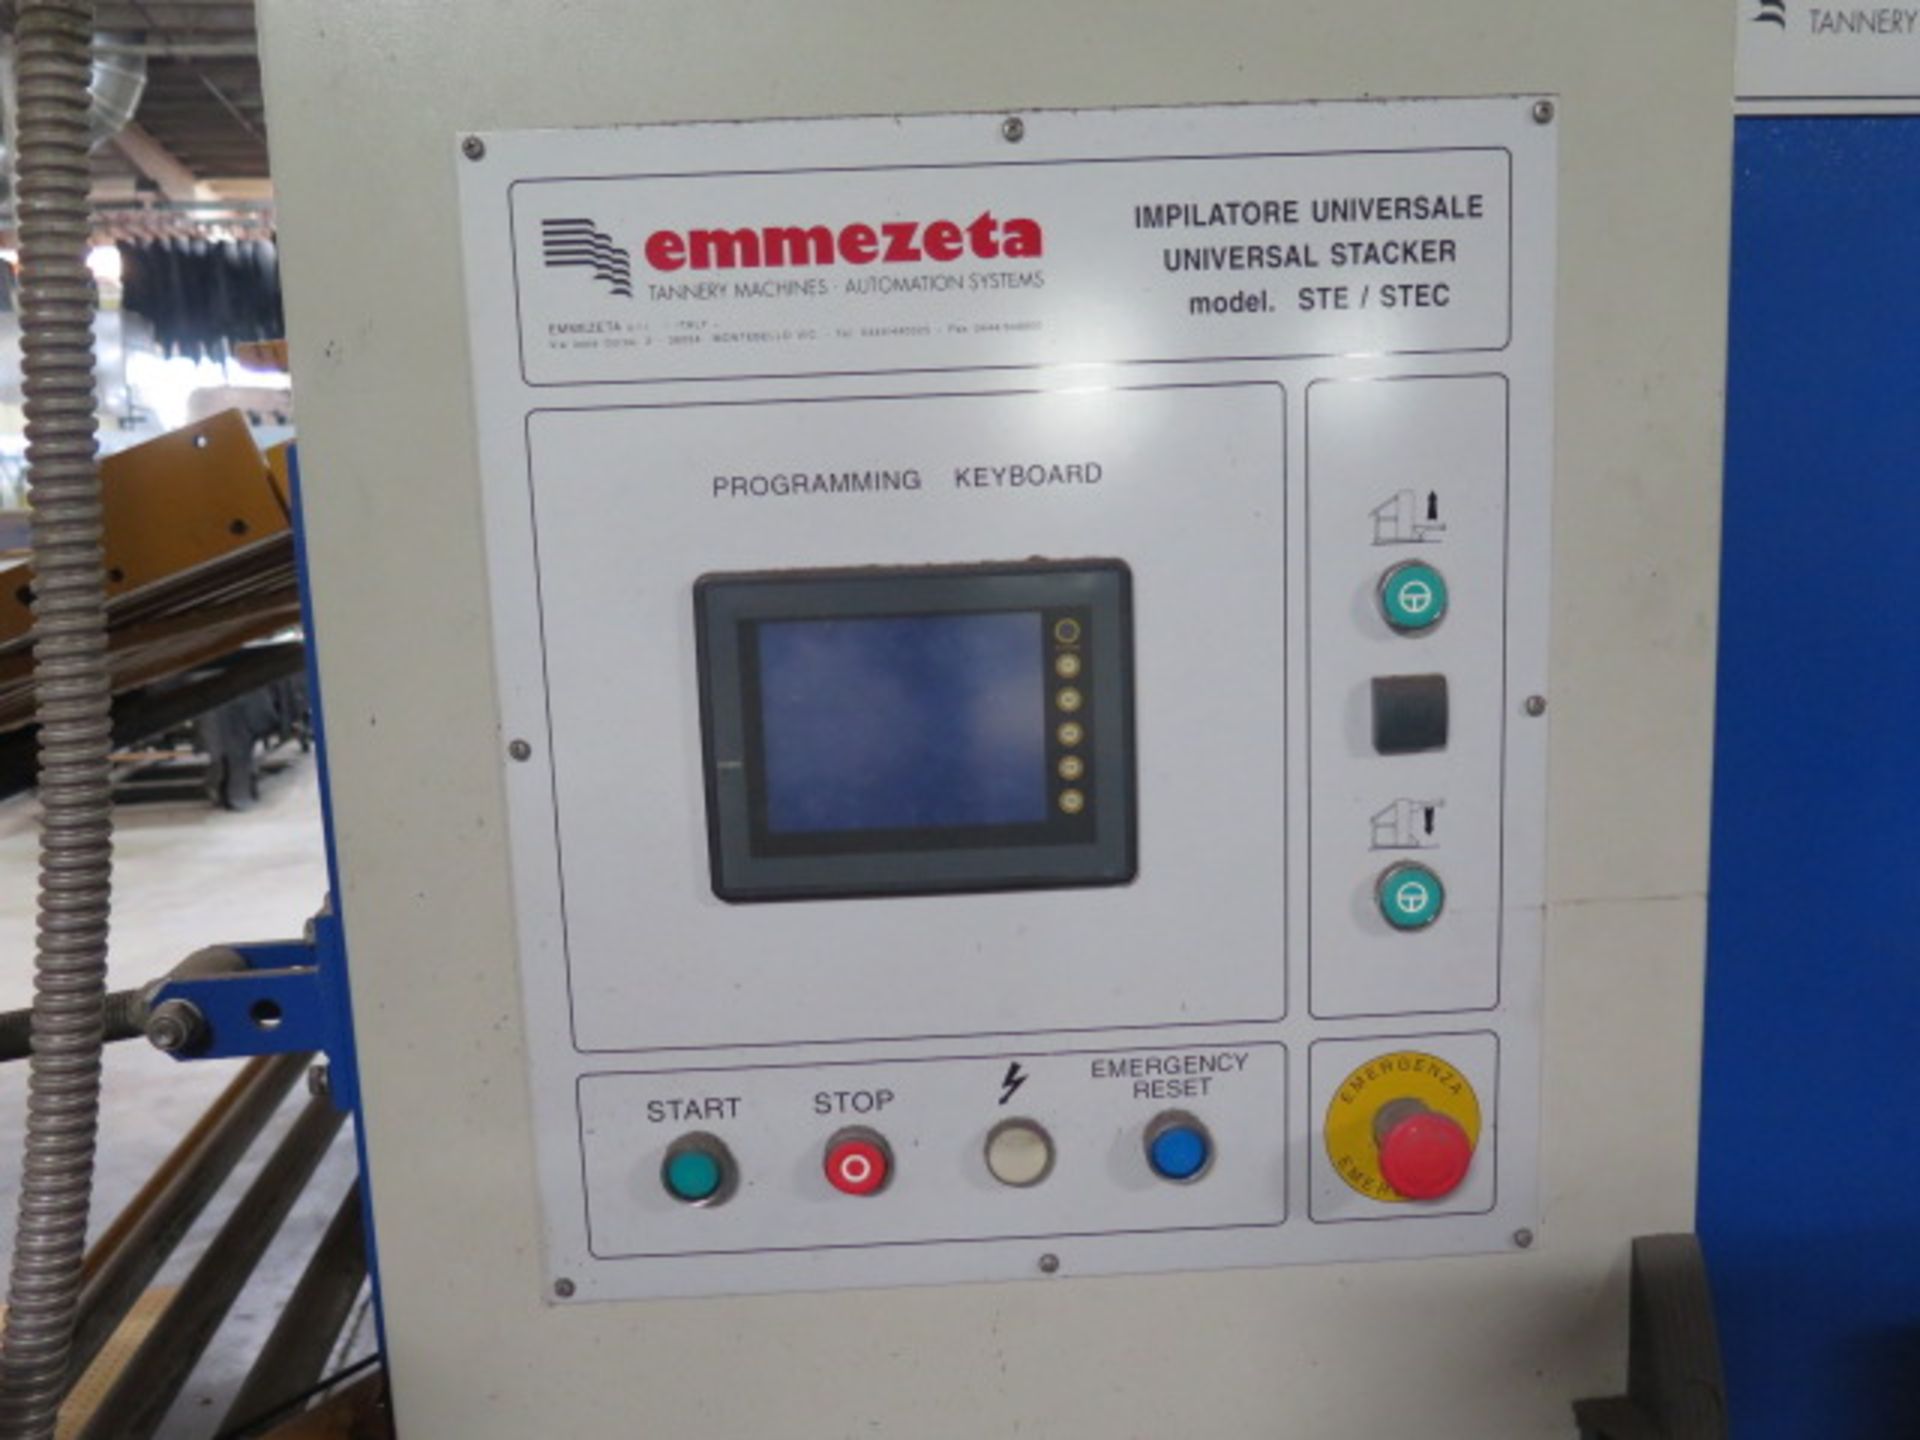 2003 Emmezeta Tannery mdl. STEN 3217L 3-Meter Universal Stacker s/n 1584 w/ PLC Controls, SOLD AS IS - Image 11 of 13